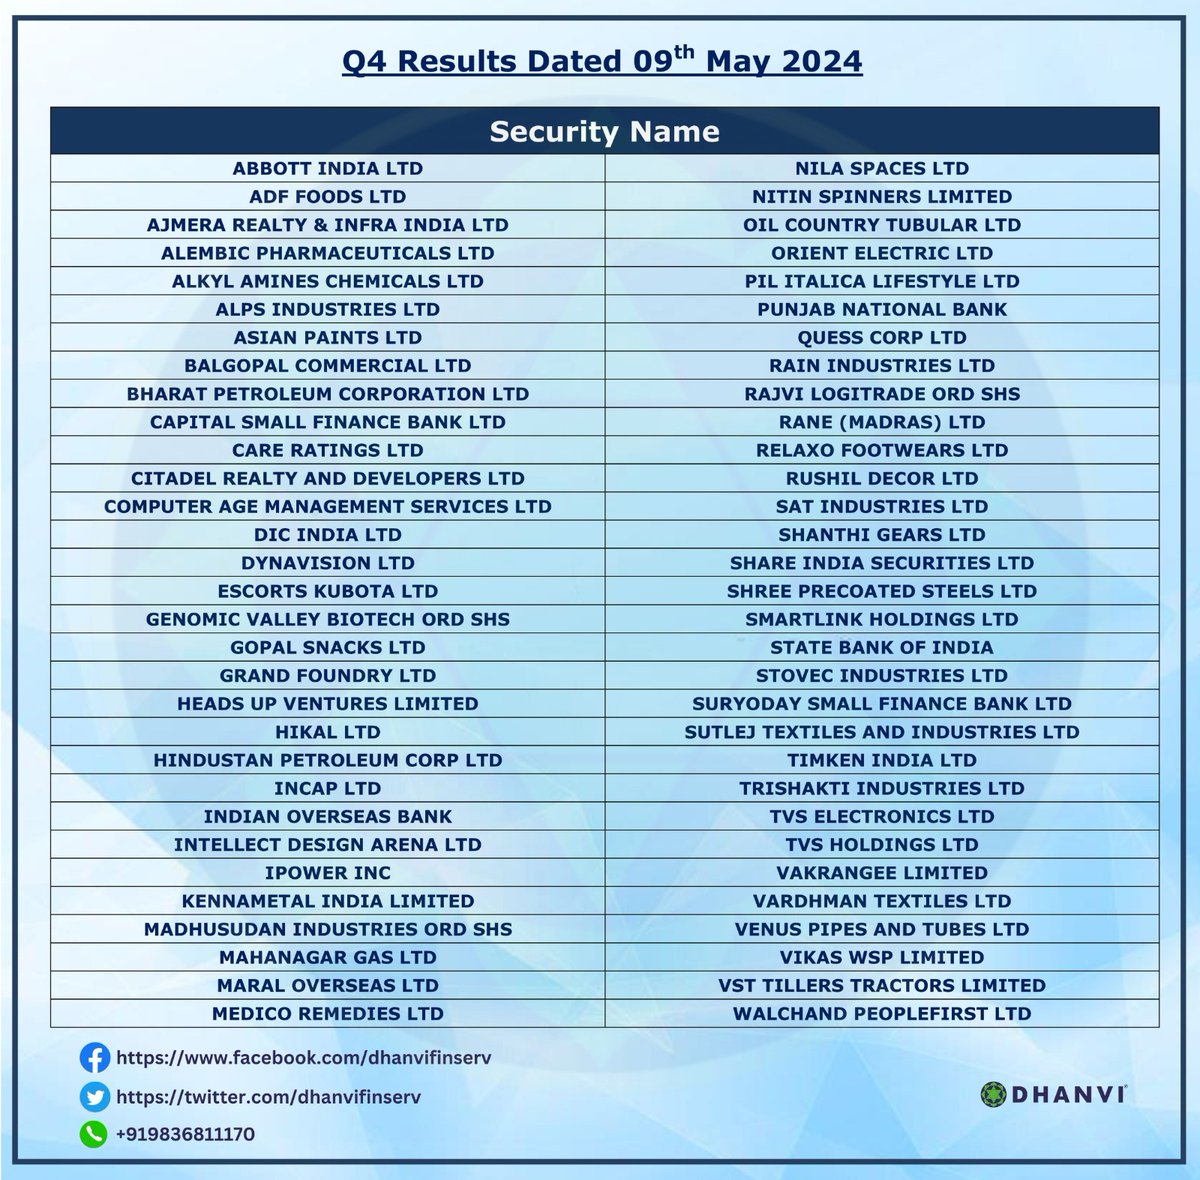 Q4 Results Dated 09th May 2024 👇

#Q4Results #dhanvifinserv #investment #sharemarketindia #sharemarketnews #market #stockmarketindia #bse #nse #niftyfifty #investment #intraday #investor #Resultstoday #Q4 #investors #stock #Q4Earnings #q4marketreport #investments #StockToWatch